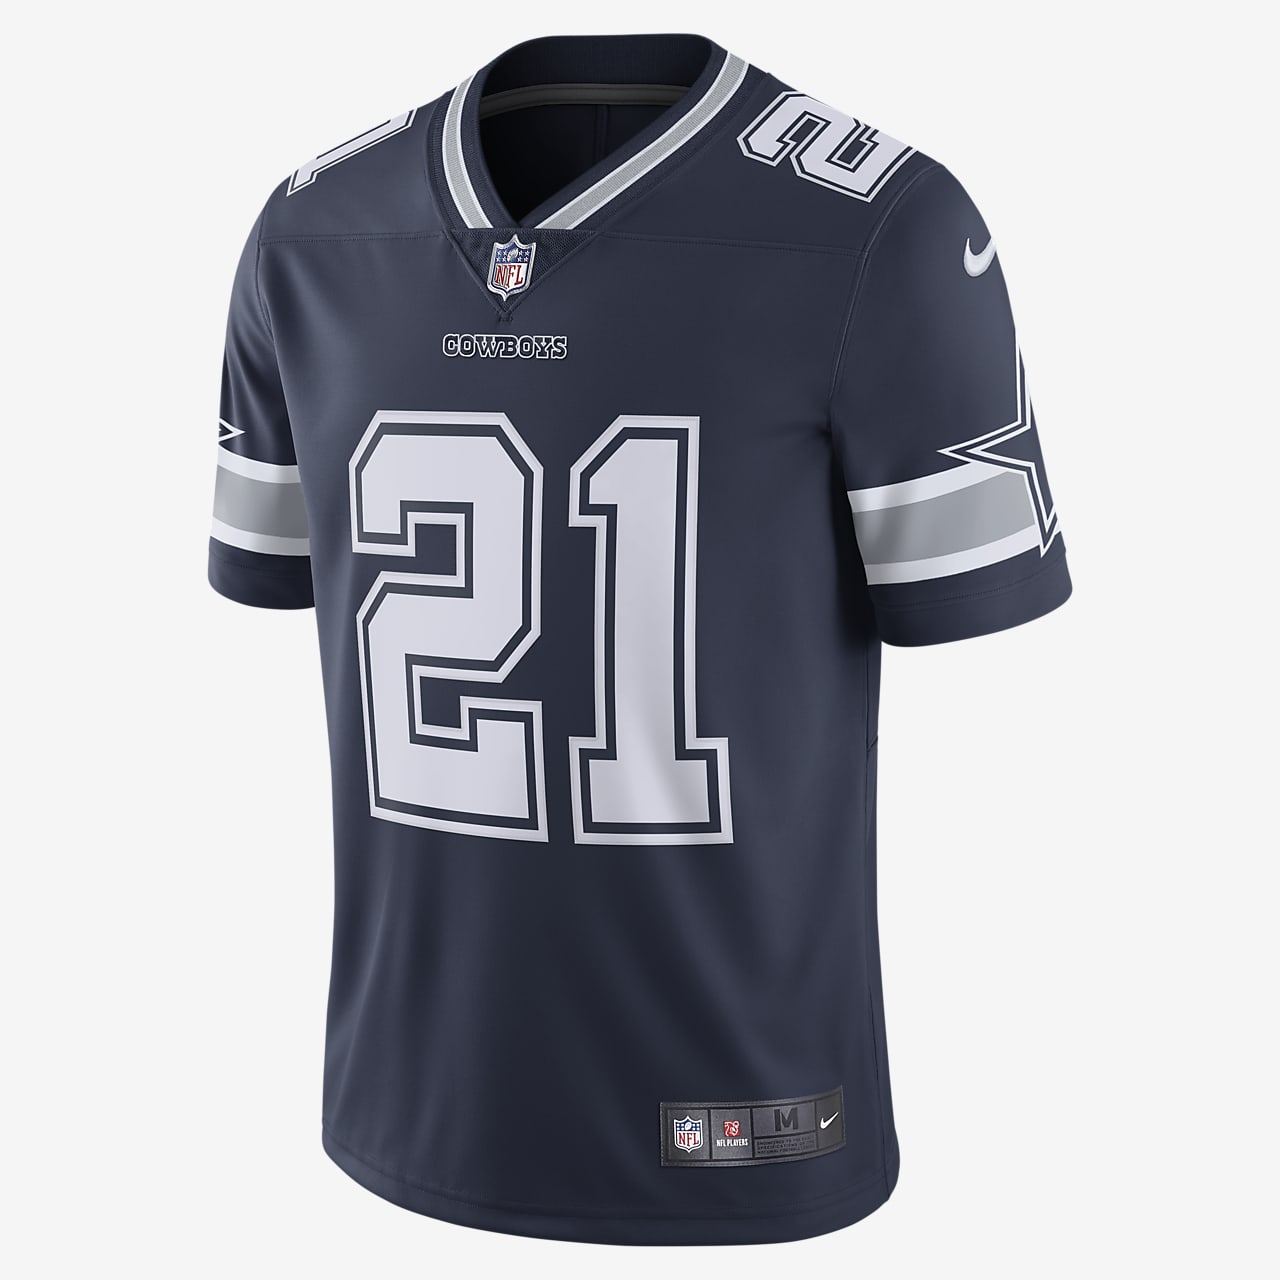 which cowboys jersey should i buy